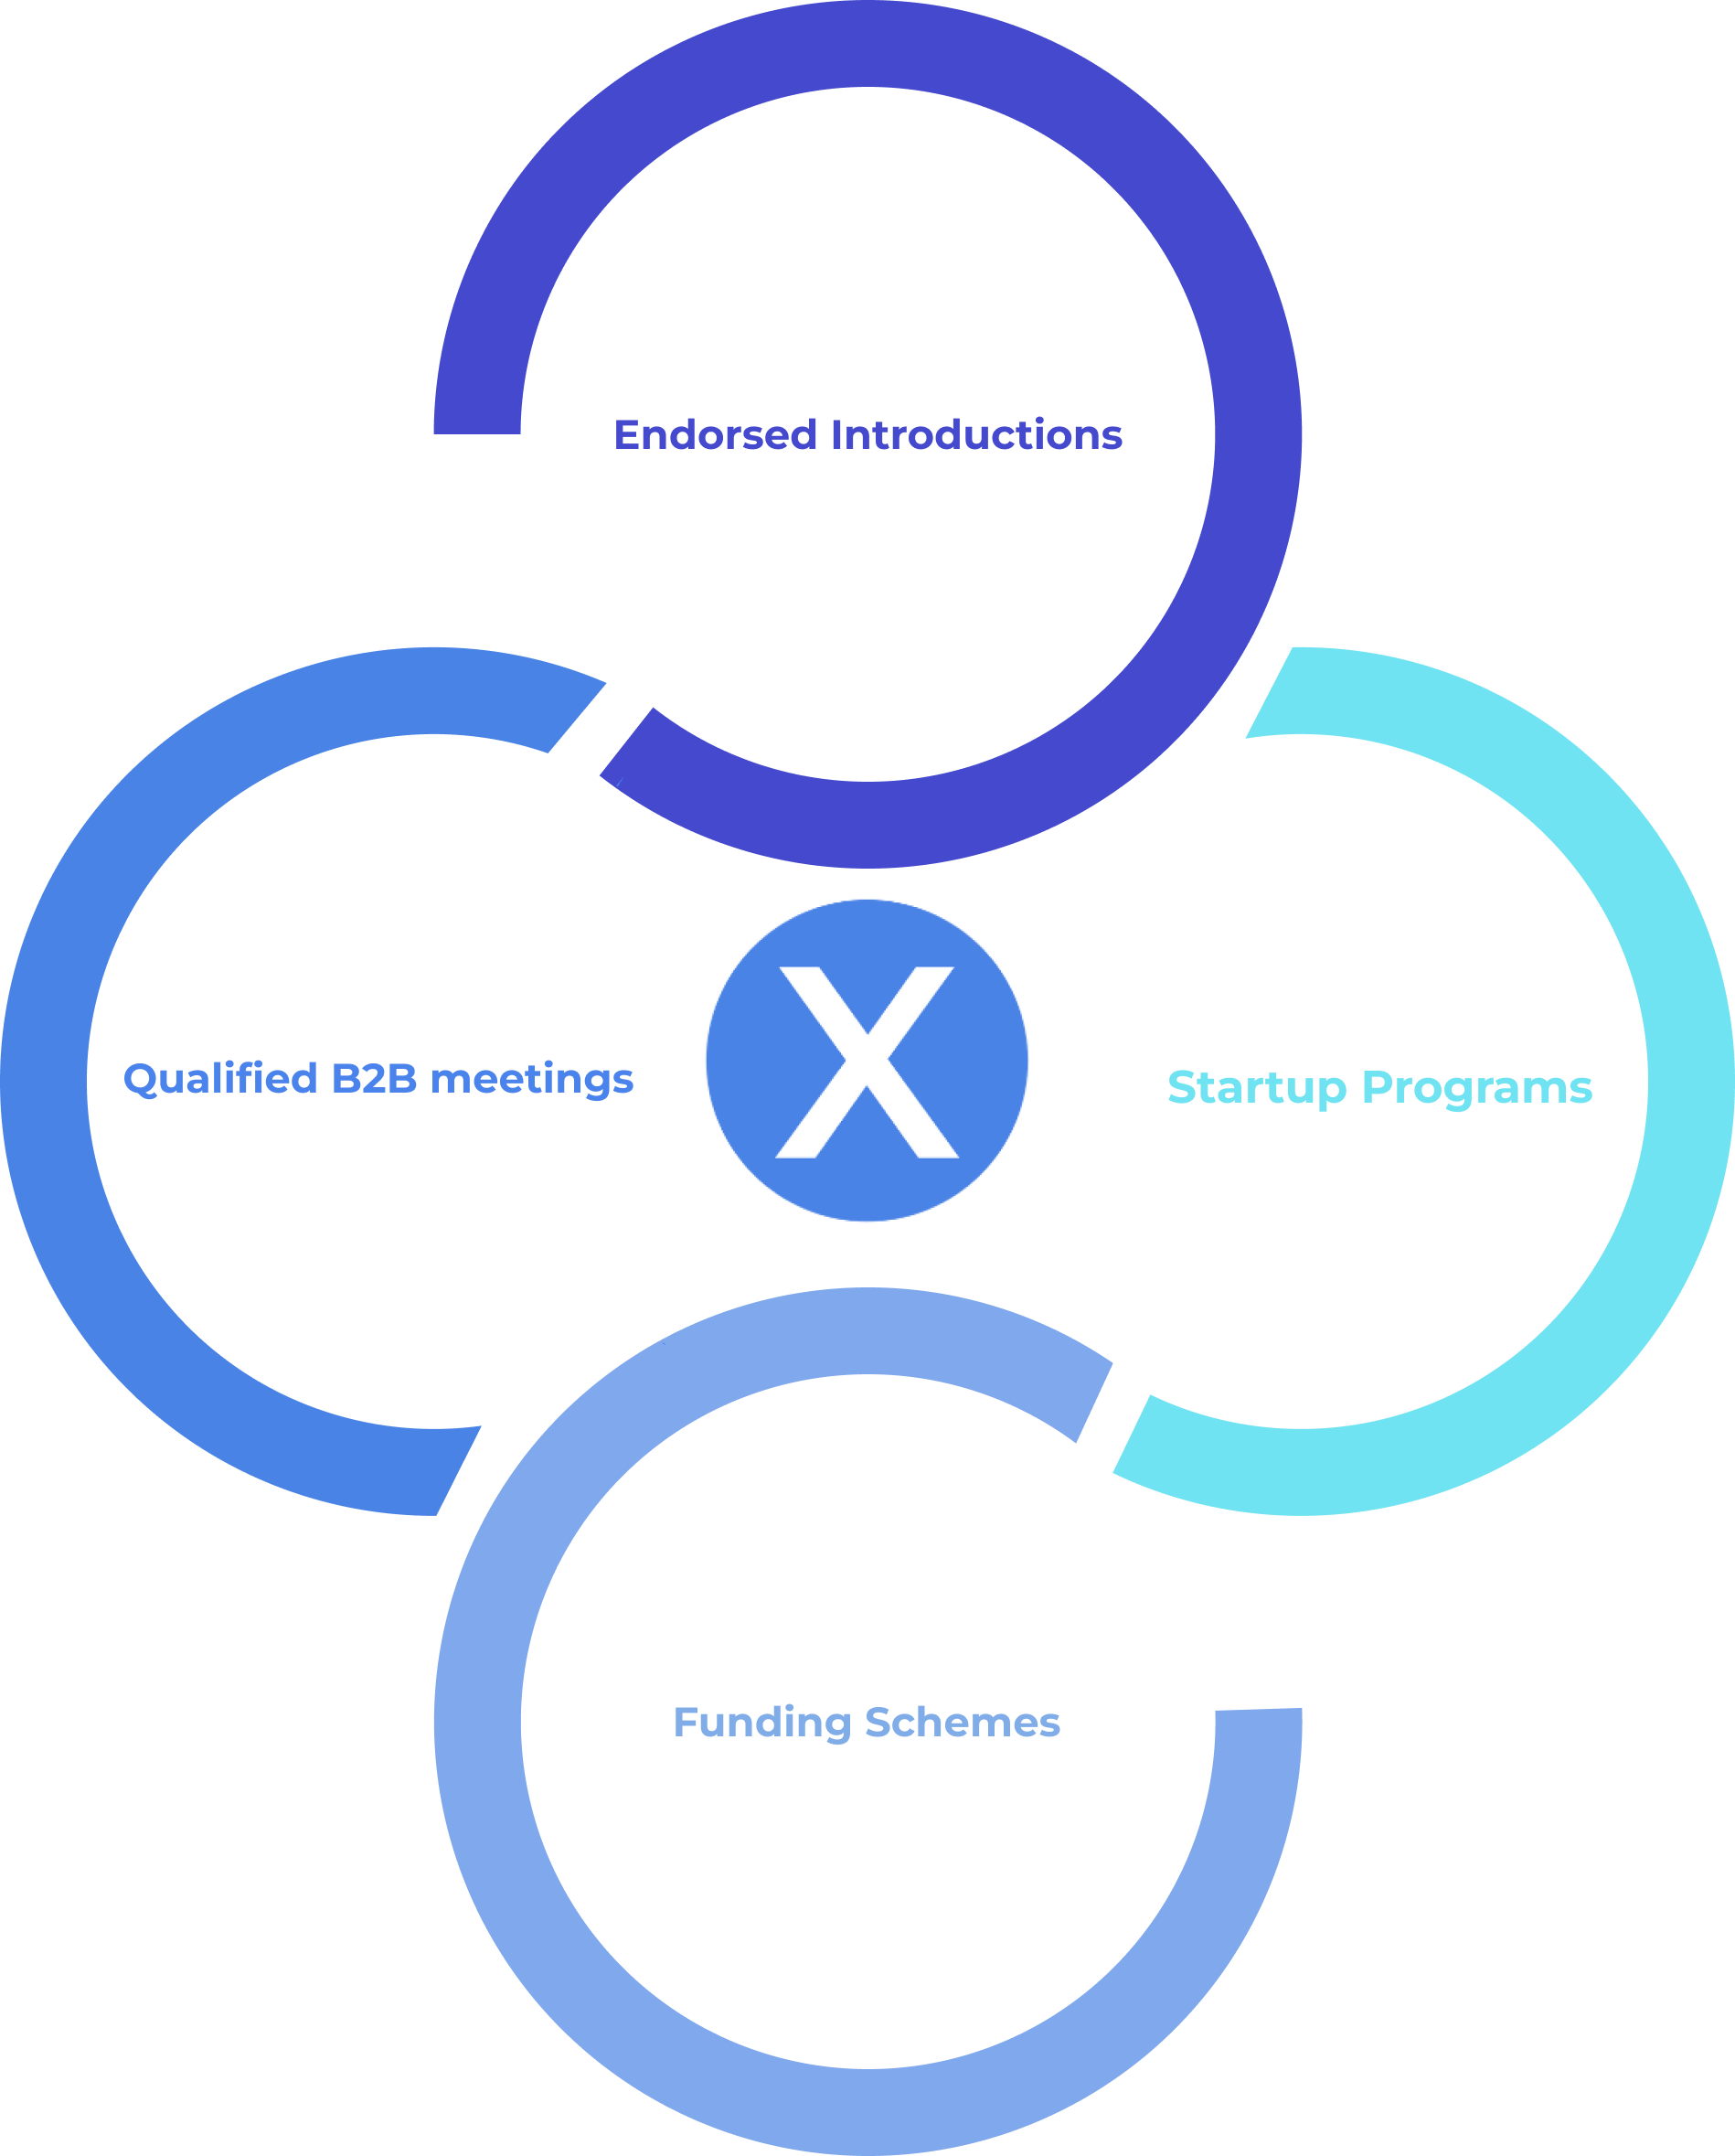 The four pillars of Expando's revenue-generating and startup growth services: endorsed introductions, appointment setting, startup programs and partnerships, and funding schemes.